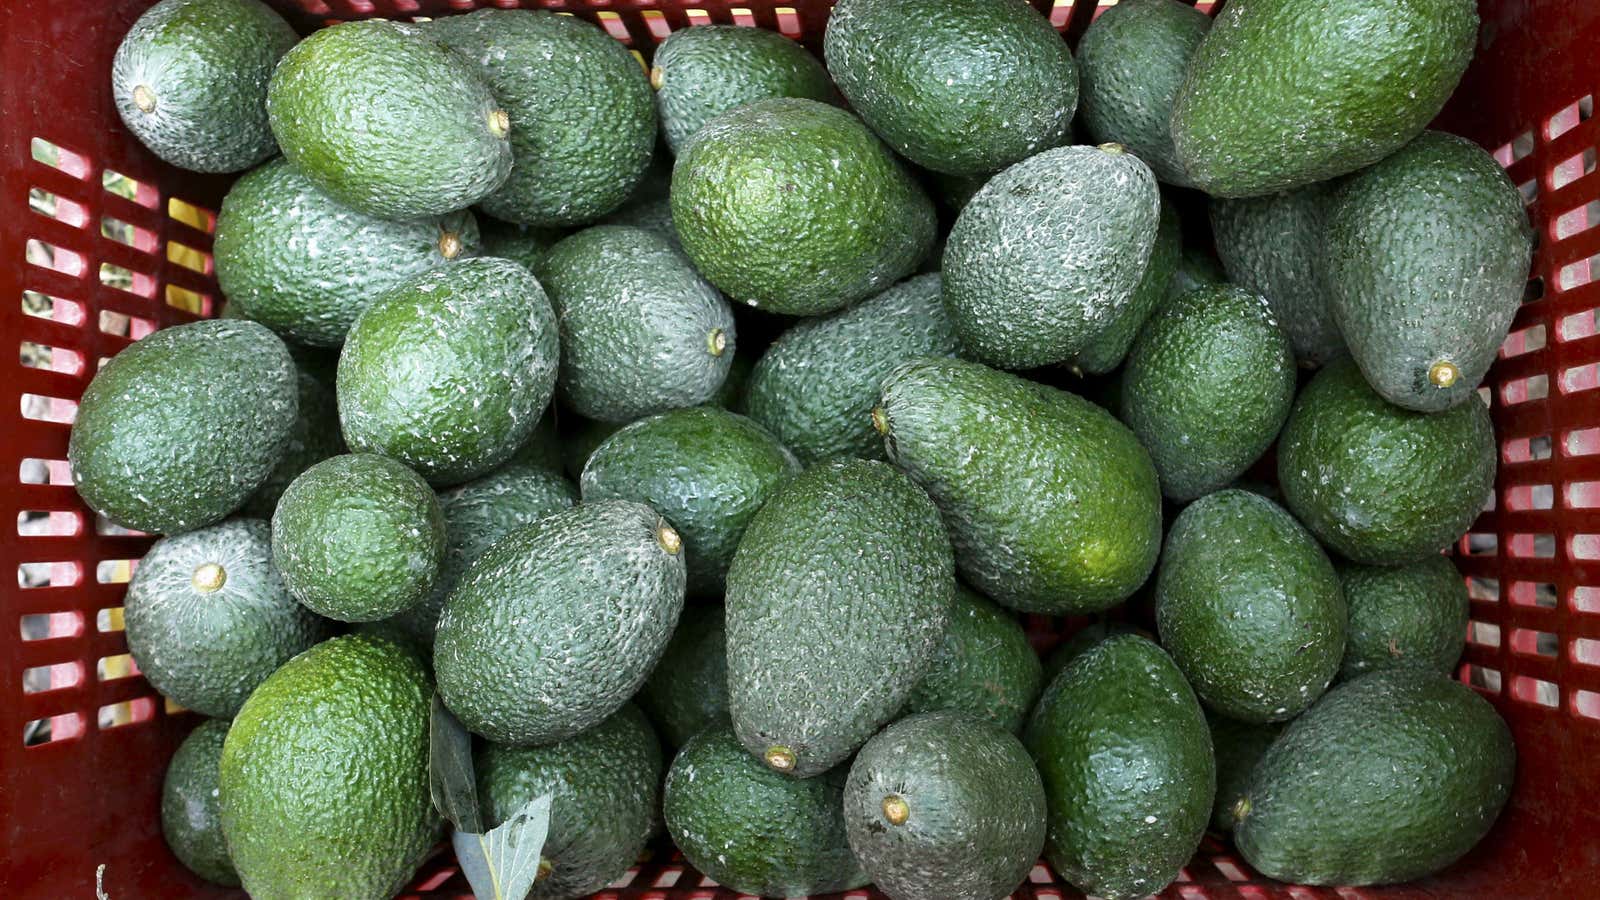 An increasing number of Chinese consumers are adding “alligator pears” to their diet.